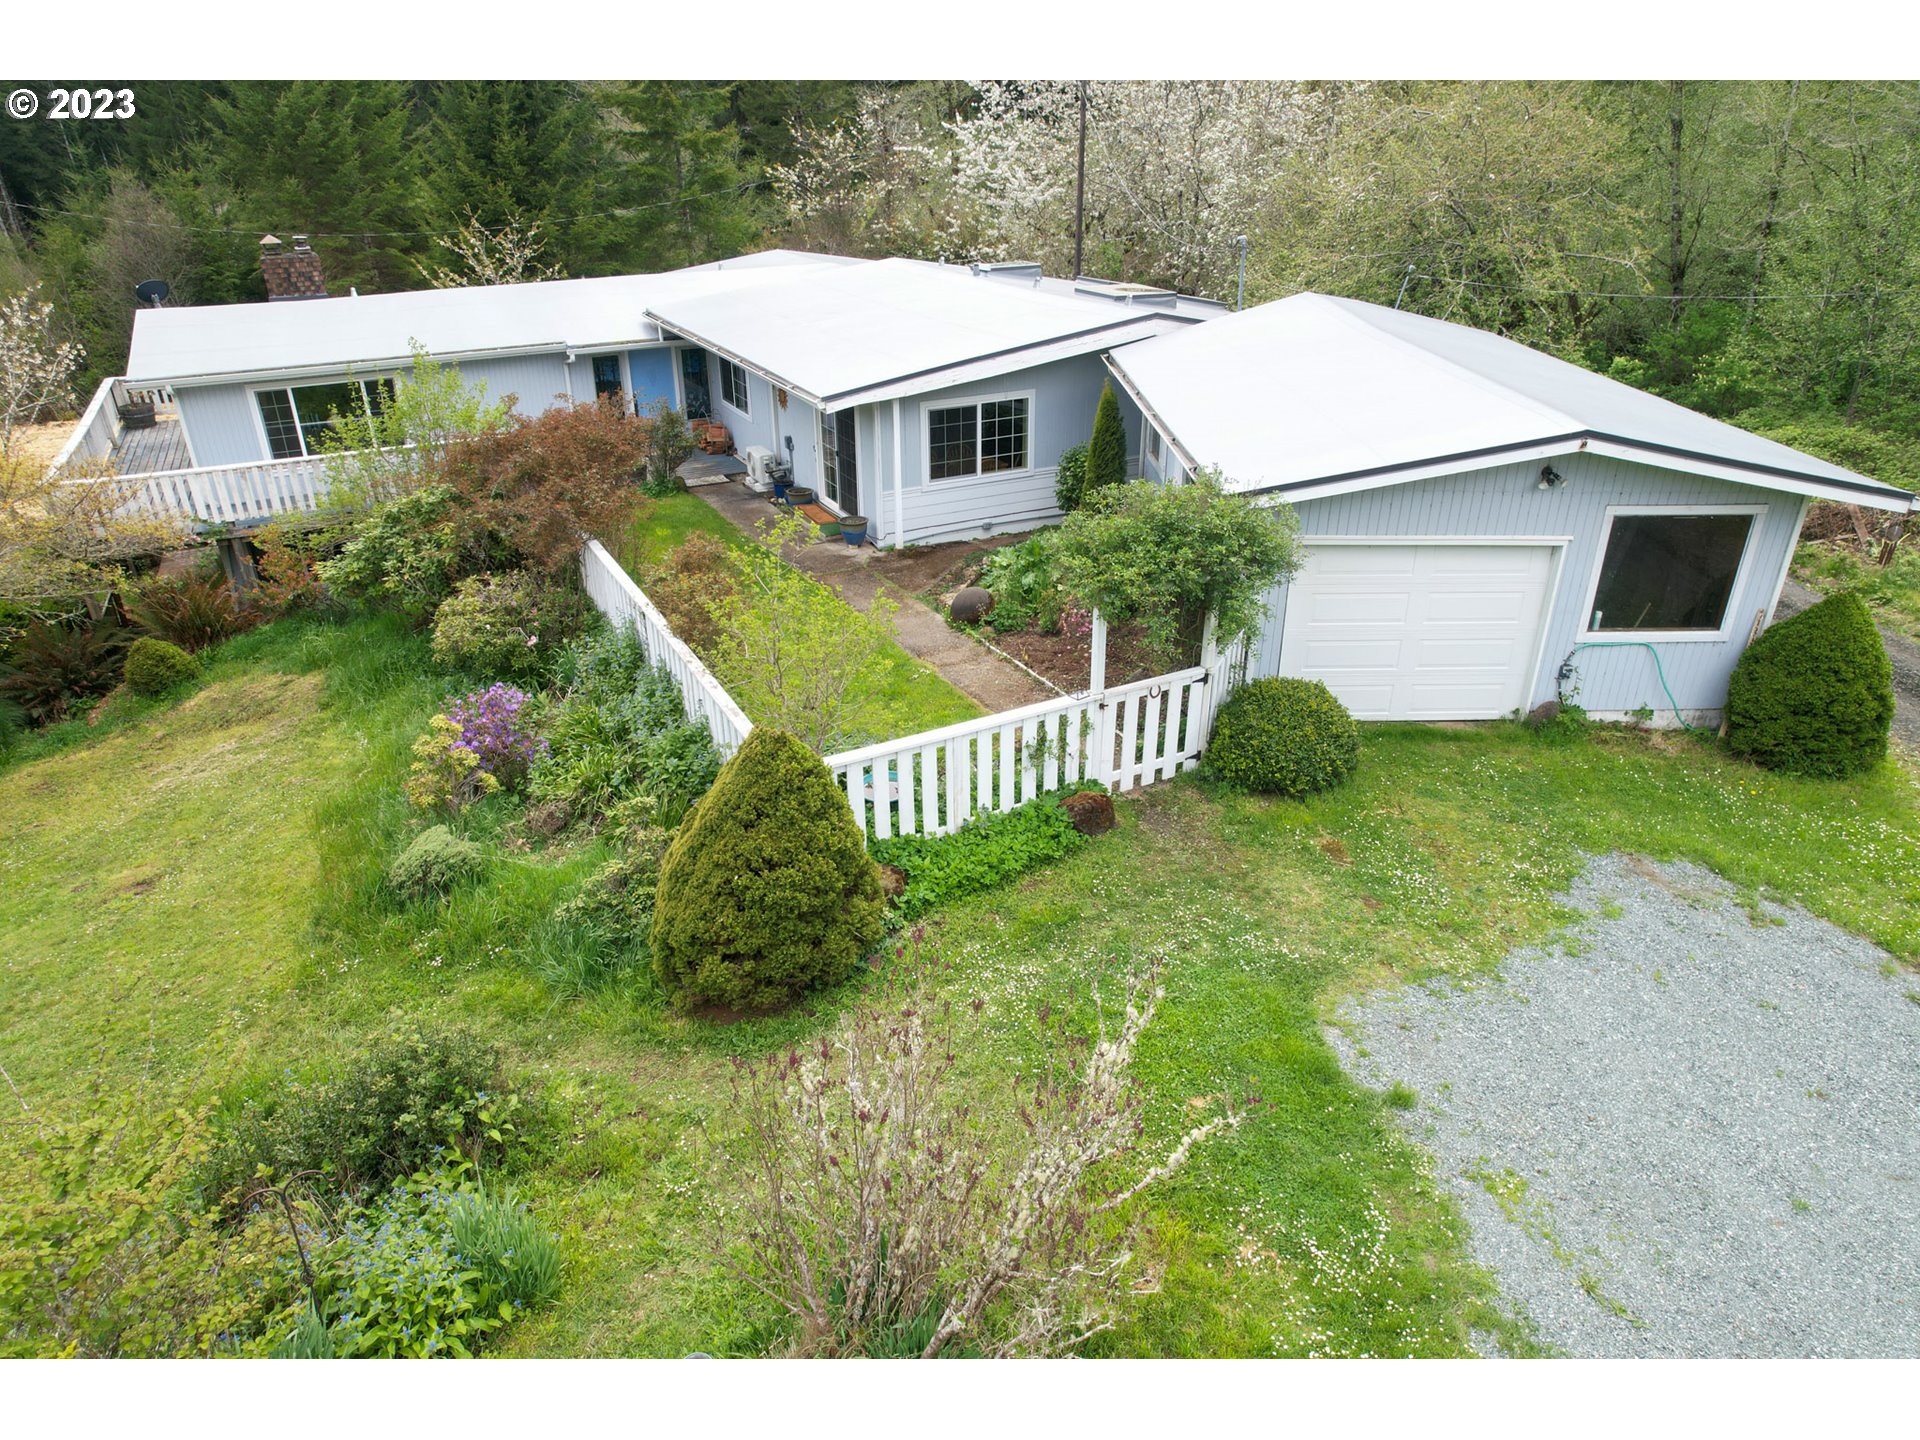 61211 DOYLE RD, Coos Bay, OR 97420